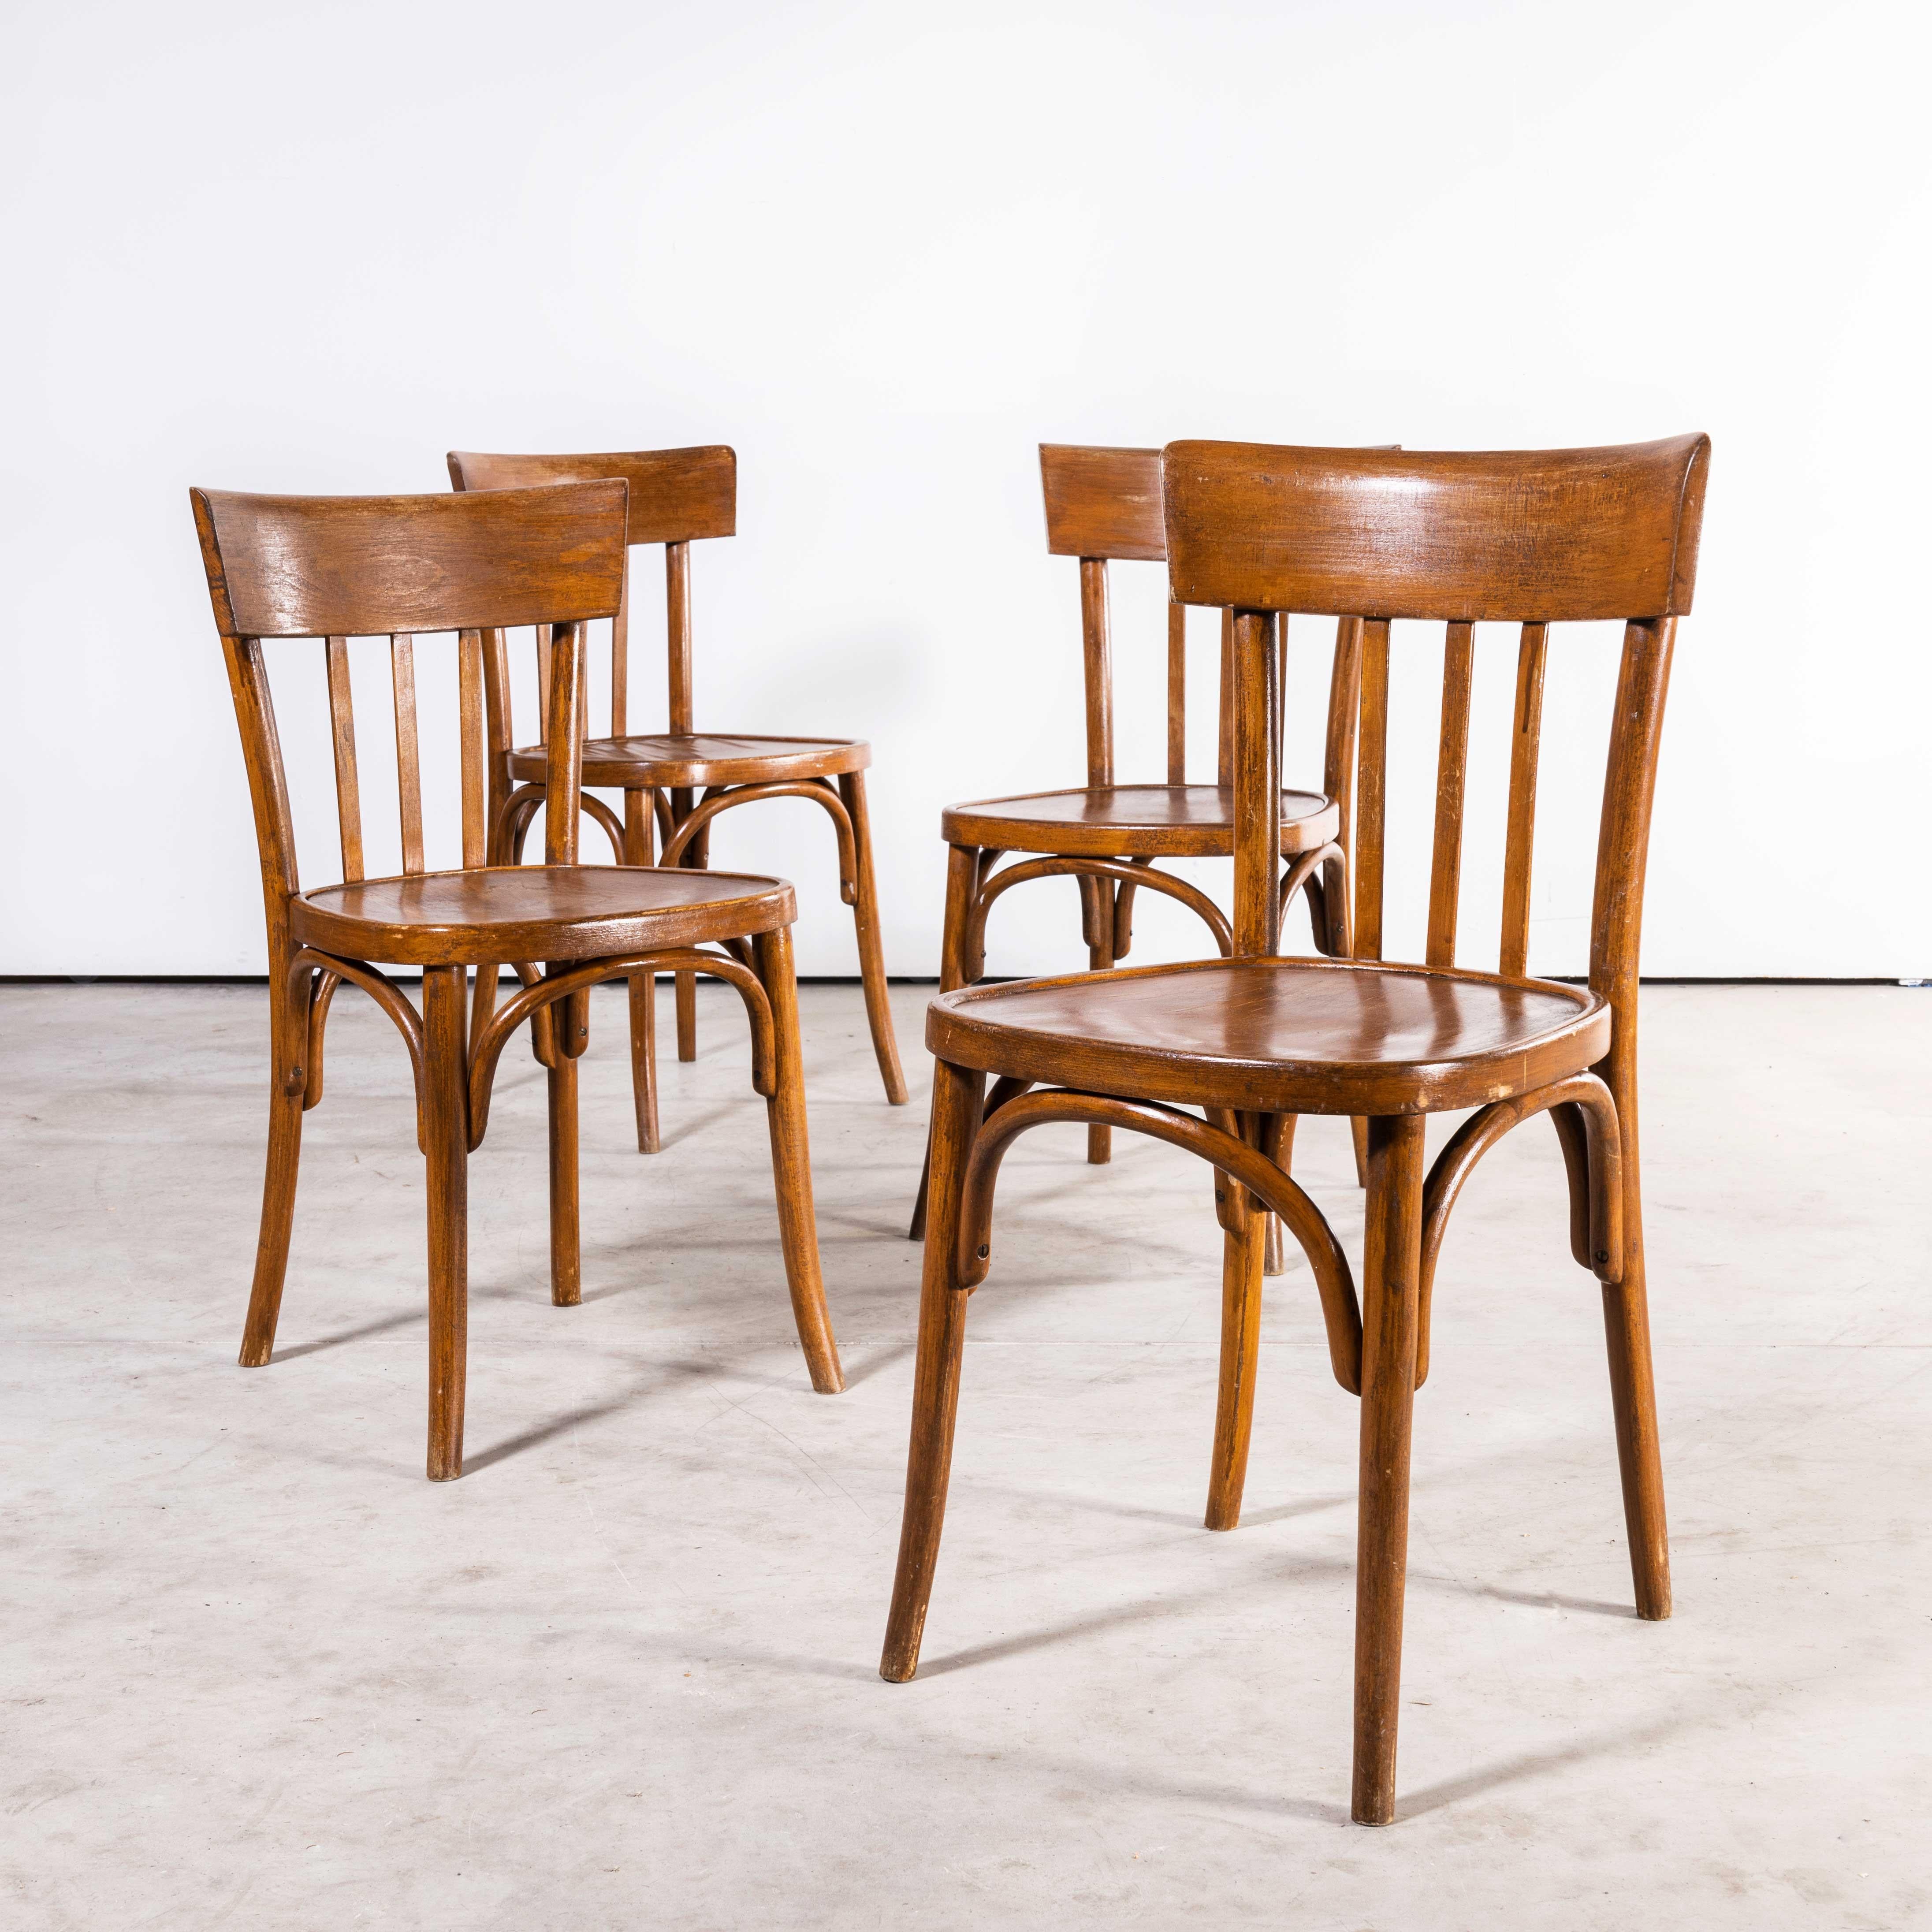 1940’s Fischel French deep back bentwood dining chairs – set of four.
1930’s Fischel French deep back bentwood dining chairs – set of four.. The chairs are not marked but we believe they are by Fischel. The process of steam bending beech to create